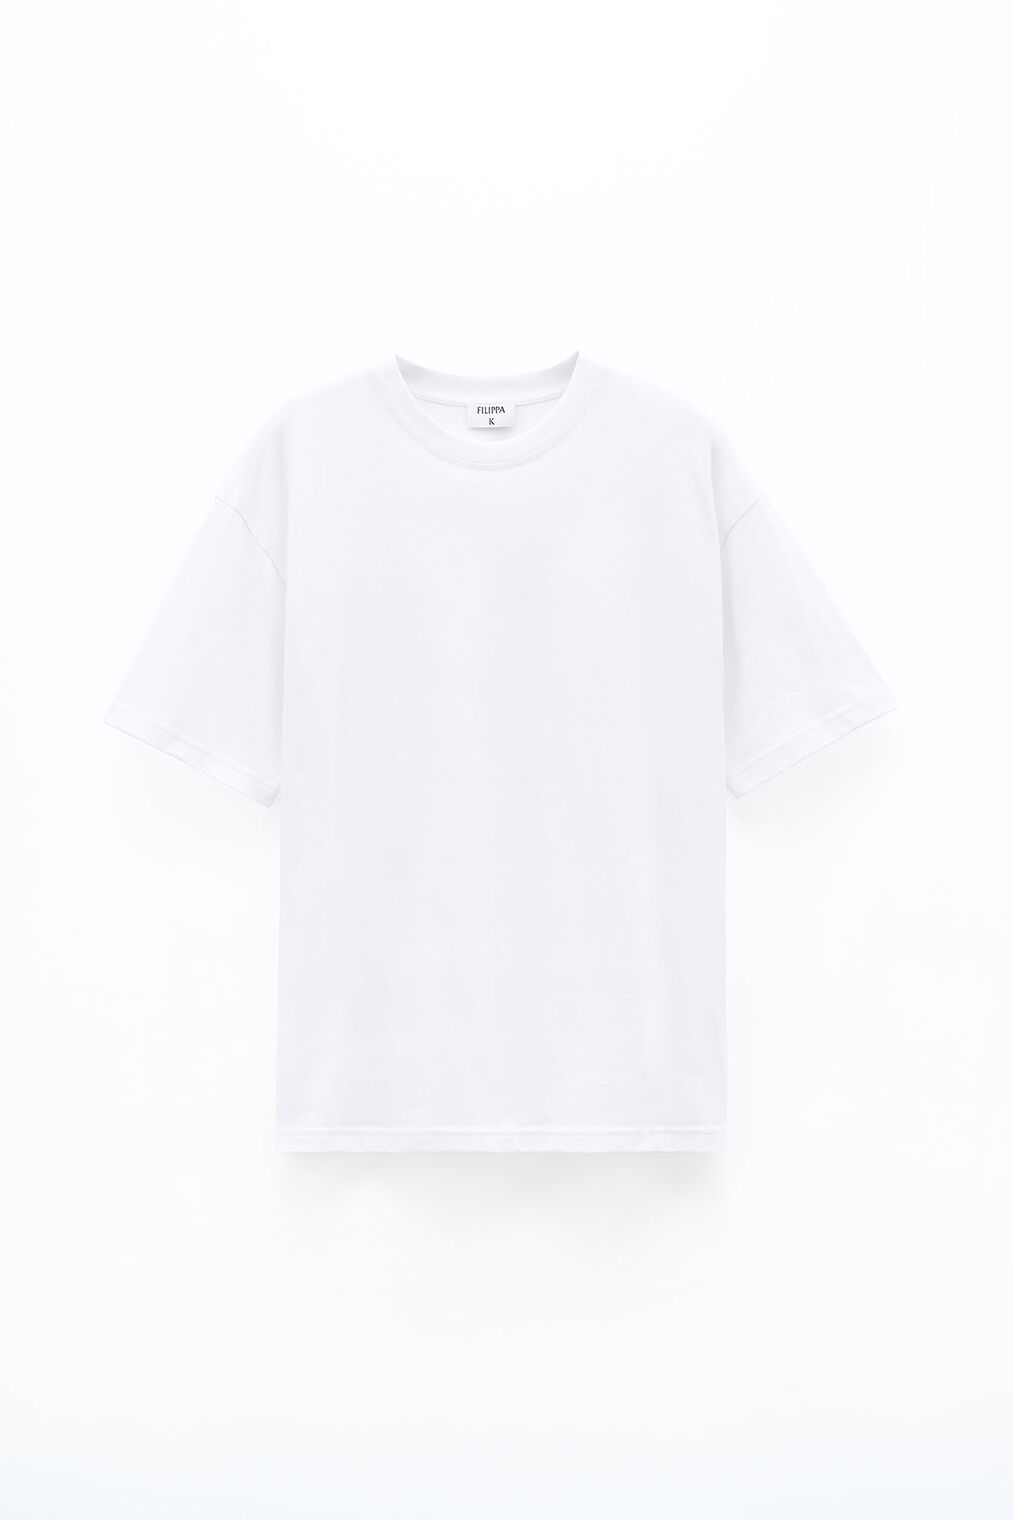 Loose fit tee in white